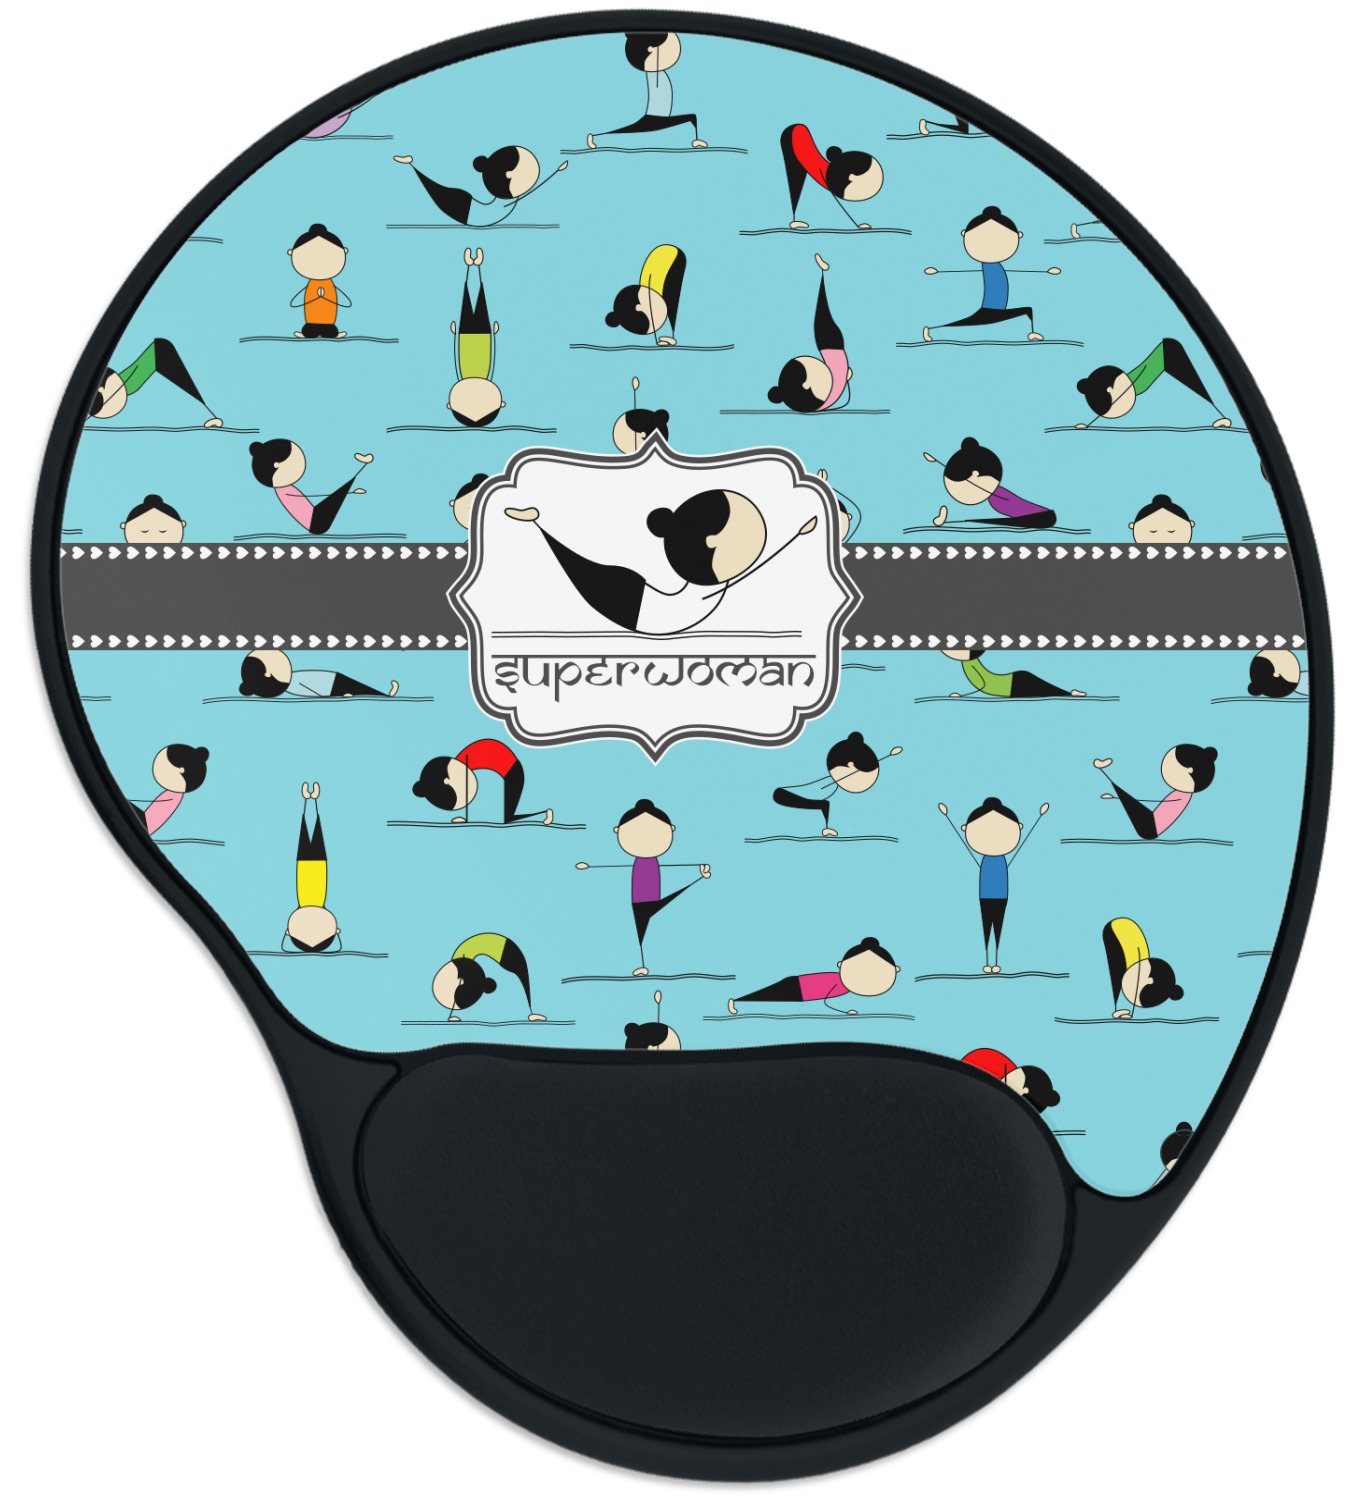 Custom Yoga Poses Mouse Pad with Wrist Support